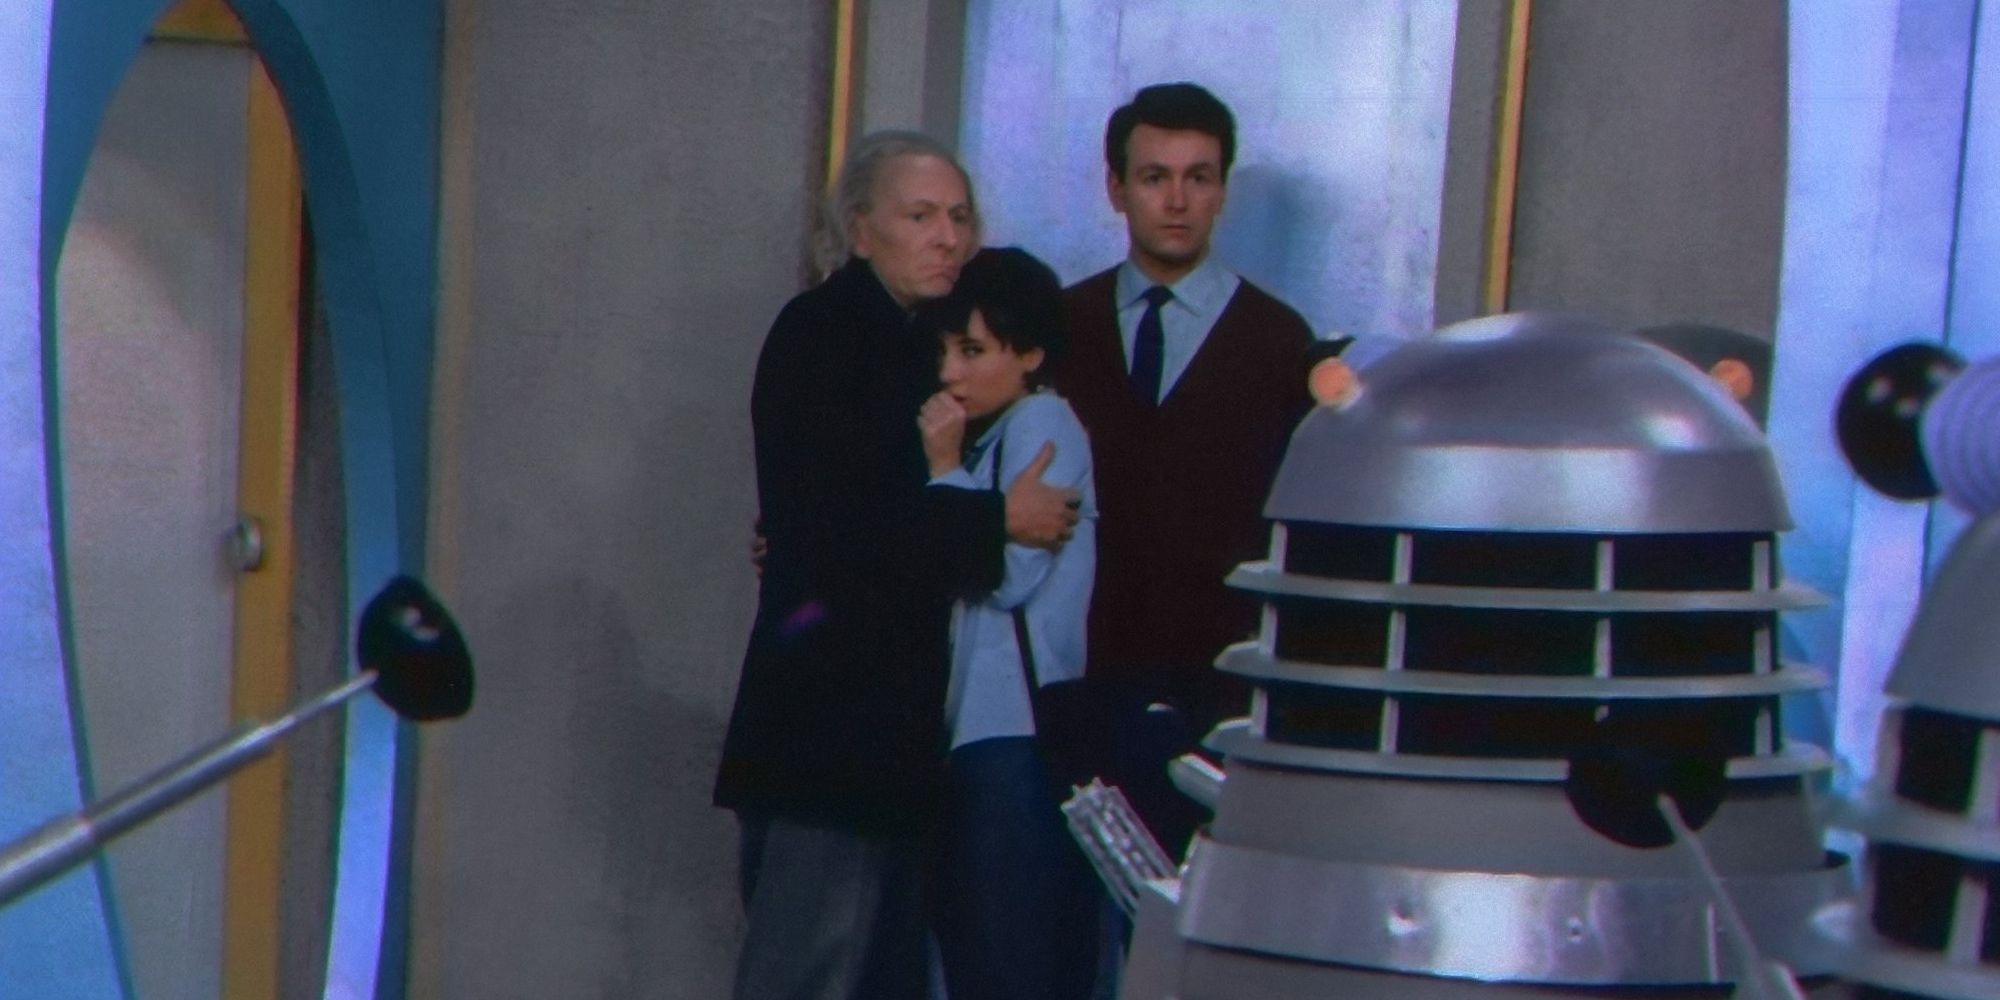 Doctor Who The Daleks William Hartnell Carole Ann Ford and William Russell as the First Doctor Susan and Ian In Color